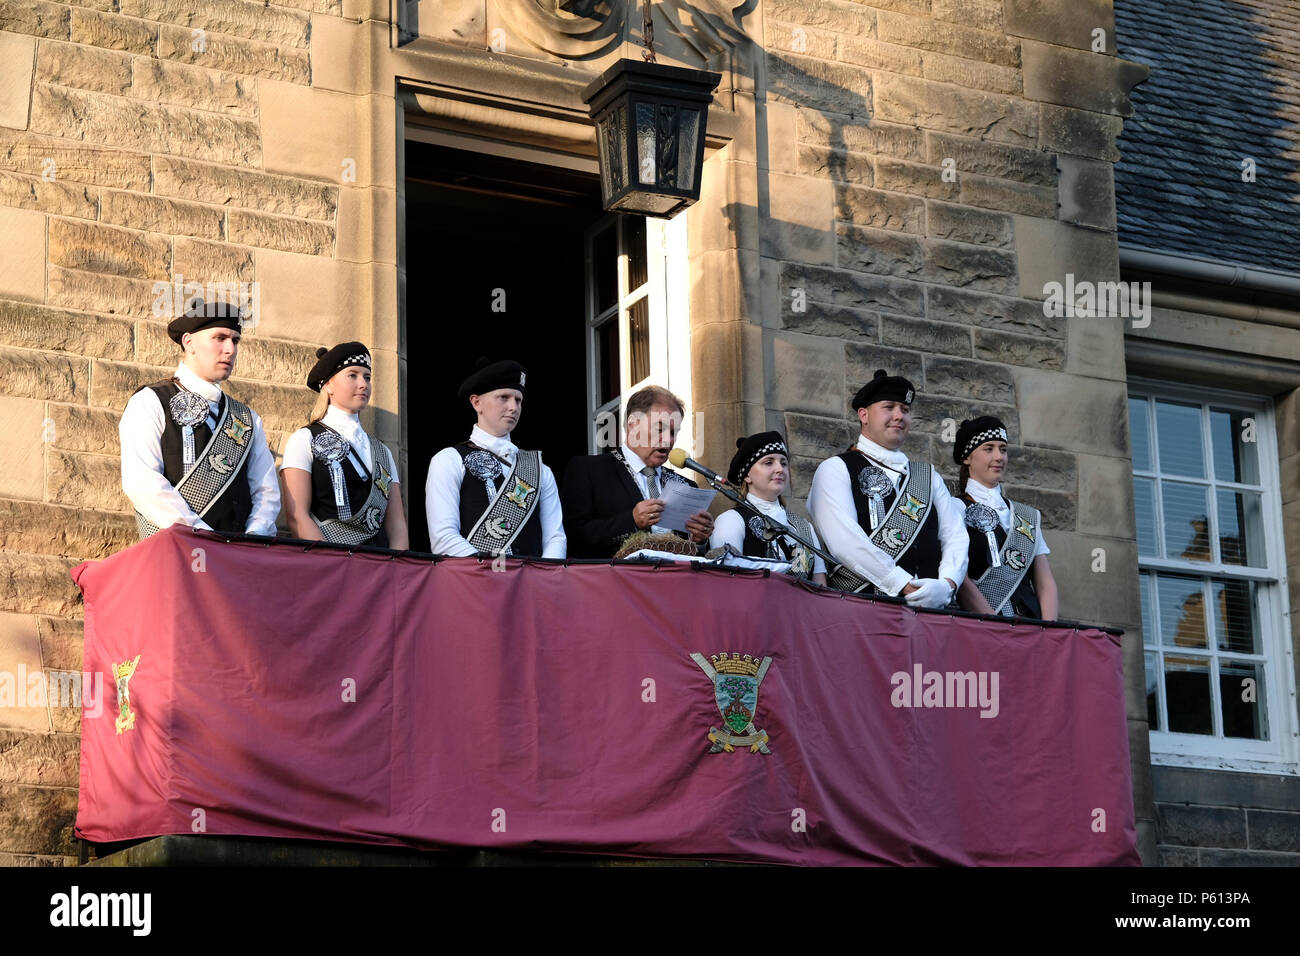 Galashiels, Scotland. 27th Jun, 2018.     Torwoodlee & Fancy Dress Formal group on Burgh Chambers at the end of the ceremonial ride to gather 'Sod & Stone' from Torwoodlee tower. BRAW LAD 2018 Greg Kelly BRAW LASS 2018 Kimberley O'May Bearer of the Sod 2018 Greg Robertson  Bearer of the Red Roses 2018 Amy Thomson Bearer of the Stone 2018 Mark Hood  Bearer of the White Roses 2018 Alex Mundell .  (Photo: Rob Gray) Credit: Rob Gray/Alamy Live News Stock Photo